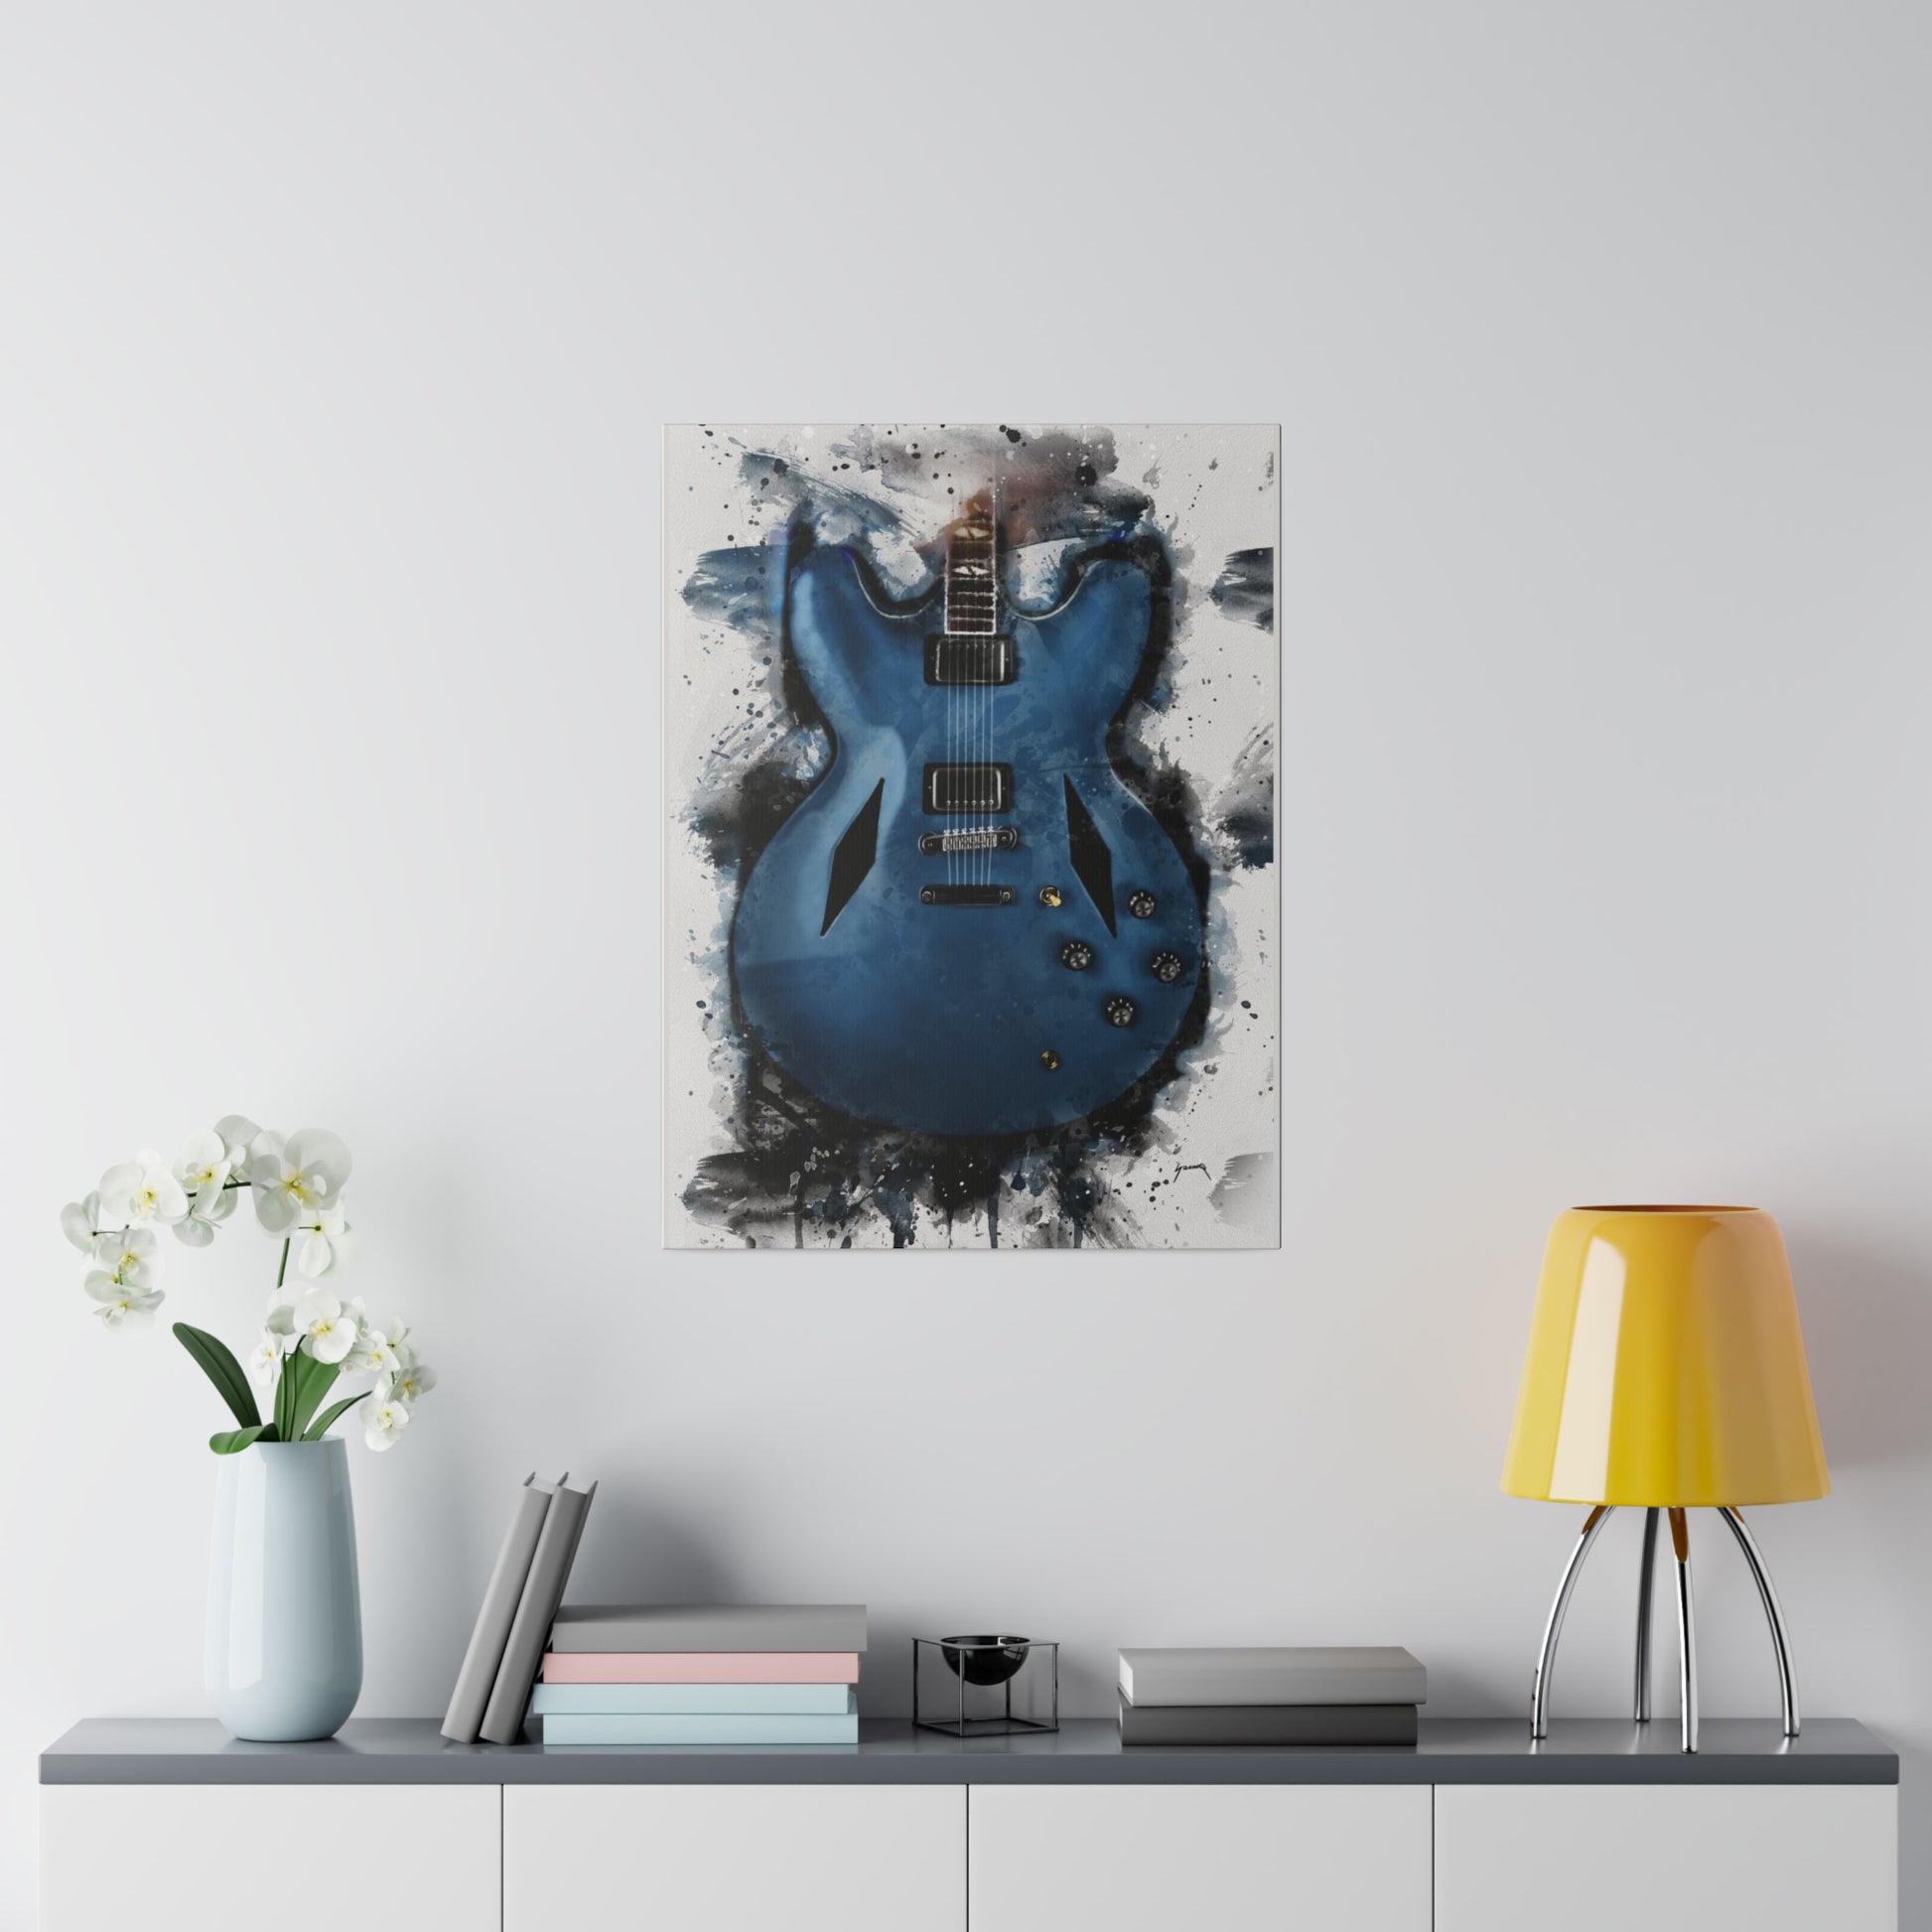 Digital painting of Dave's guitar printed on canvas